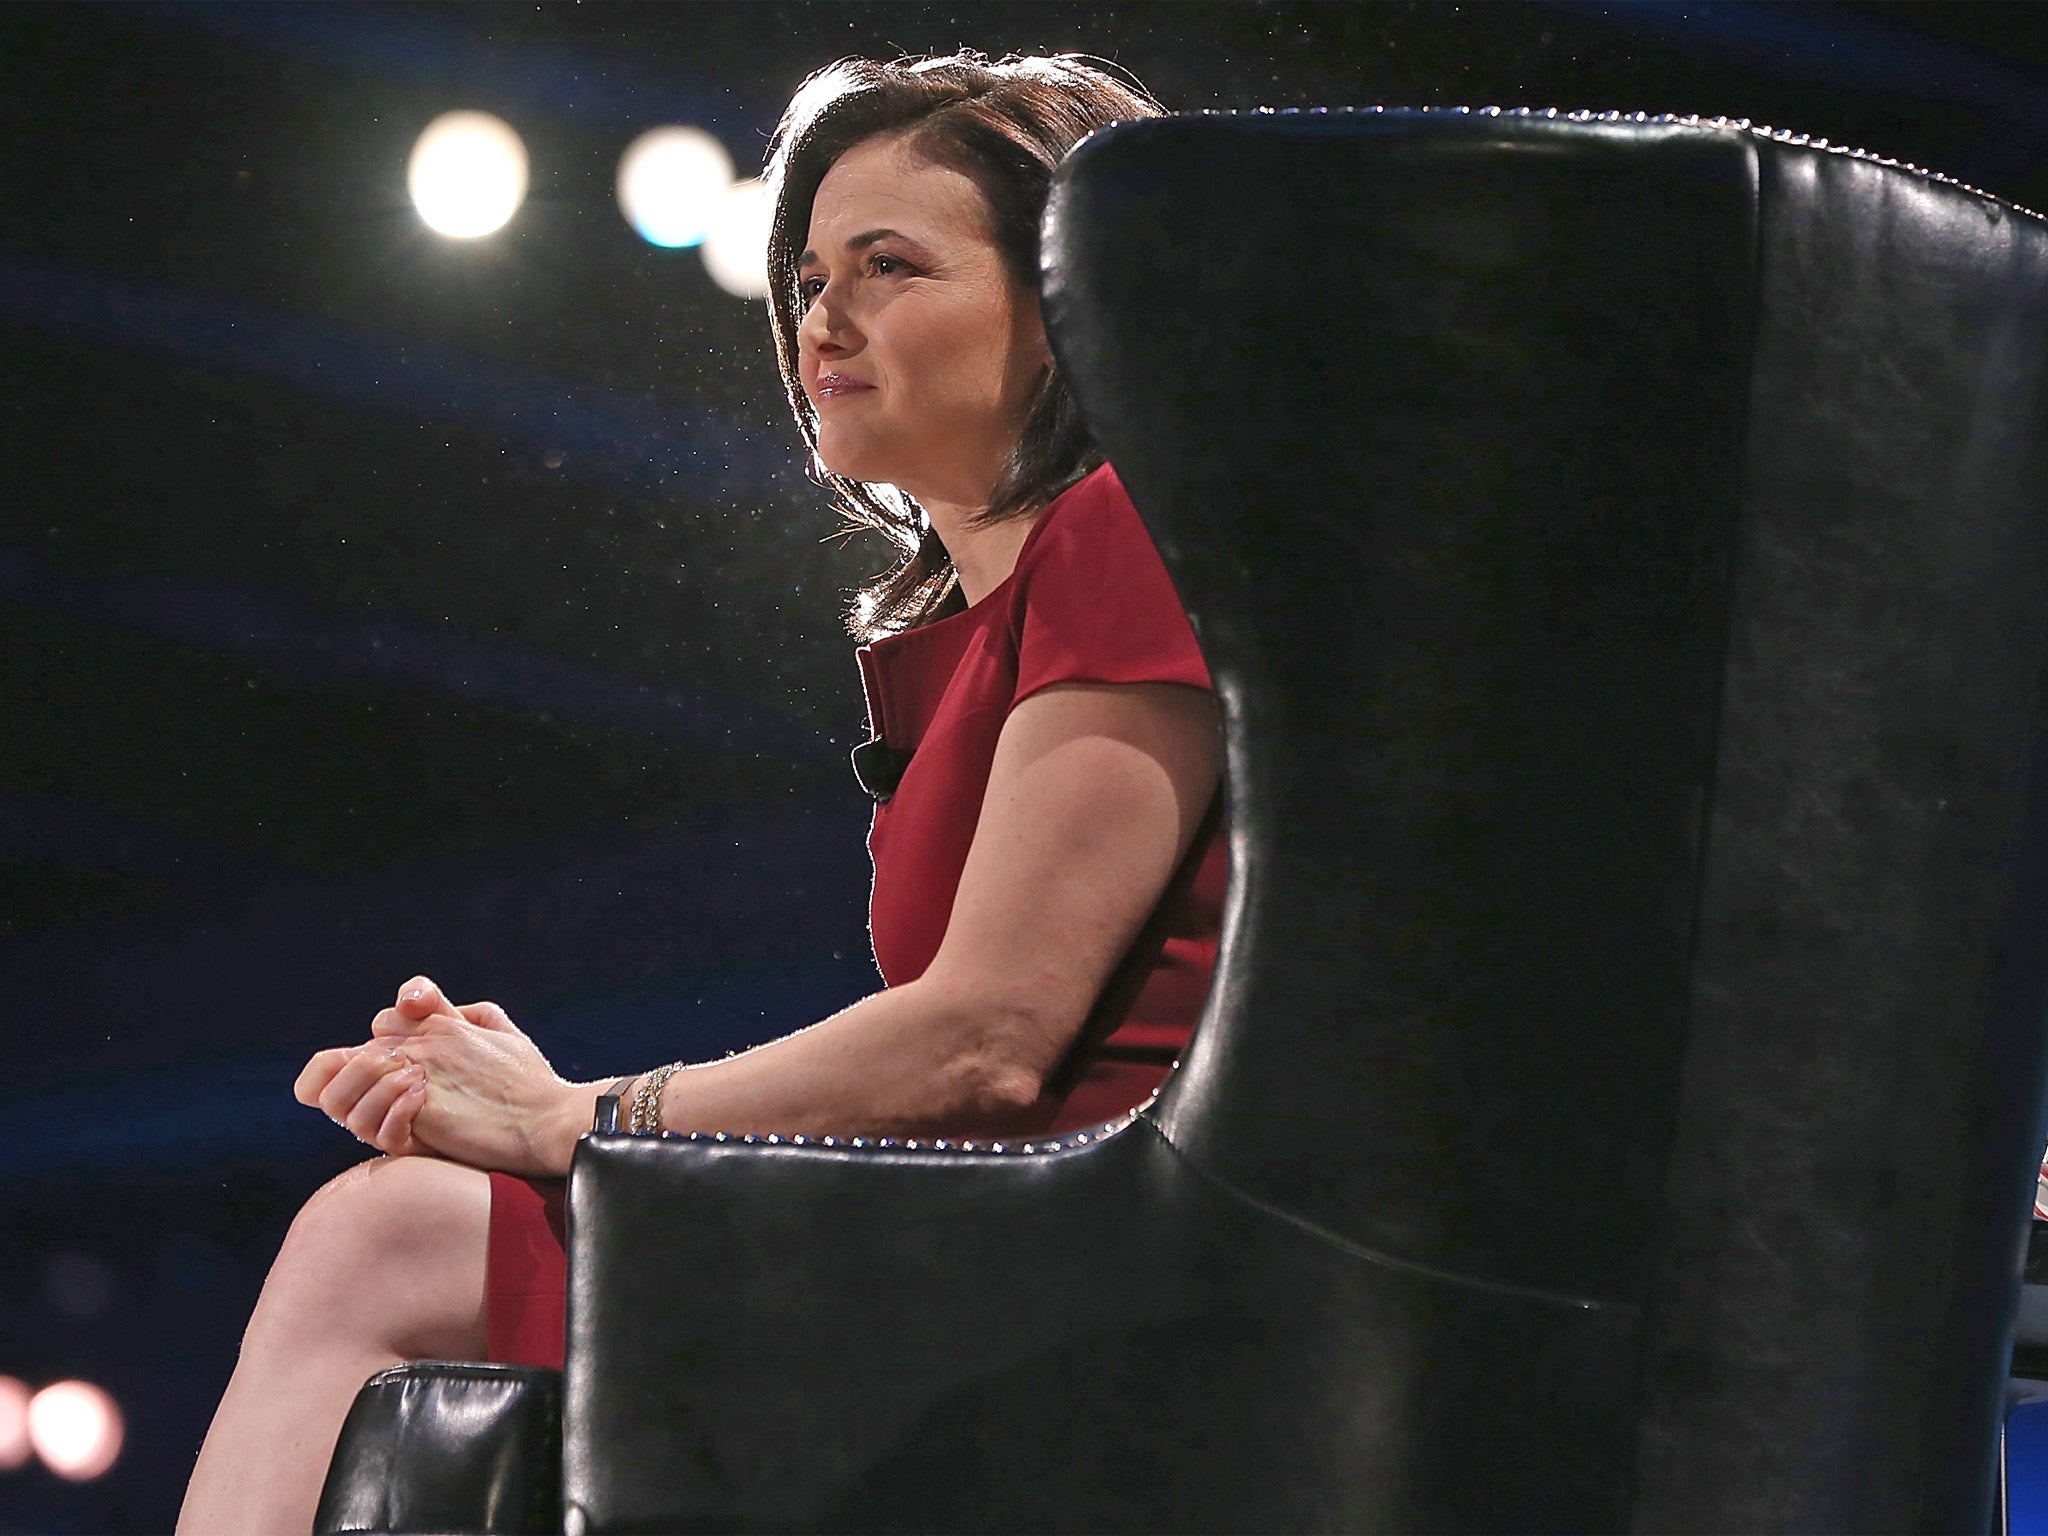 Who wants to be a billionaire? Facebook's chief operating officer Sheryl Sandberg